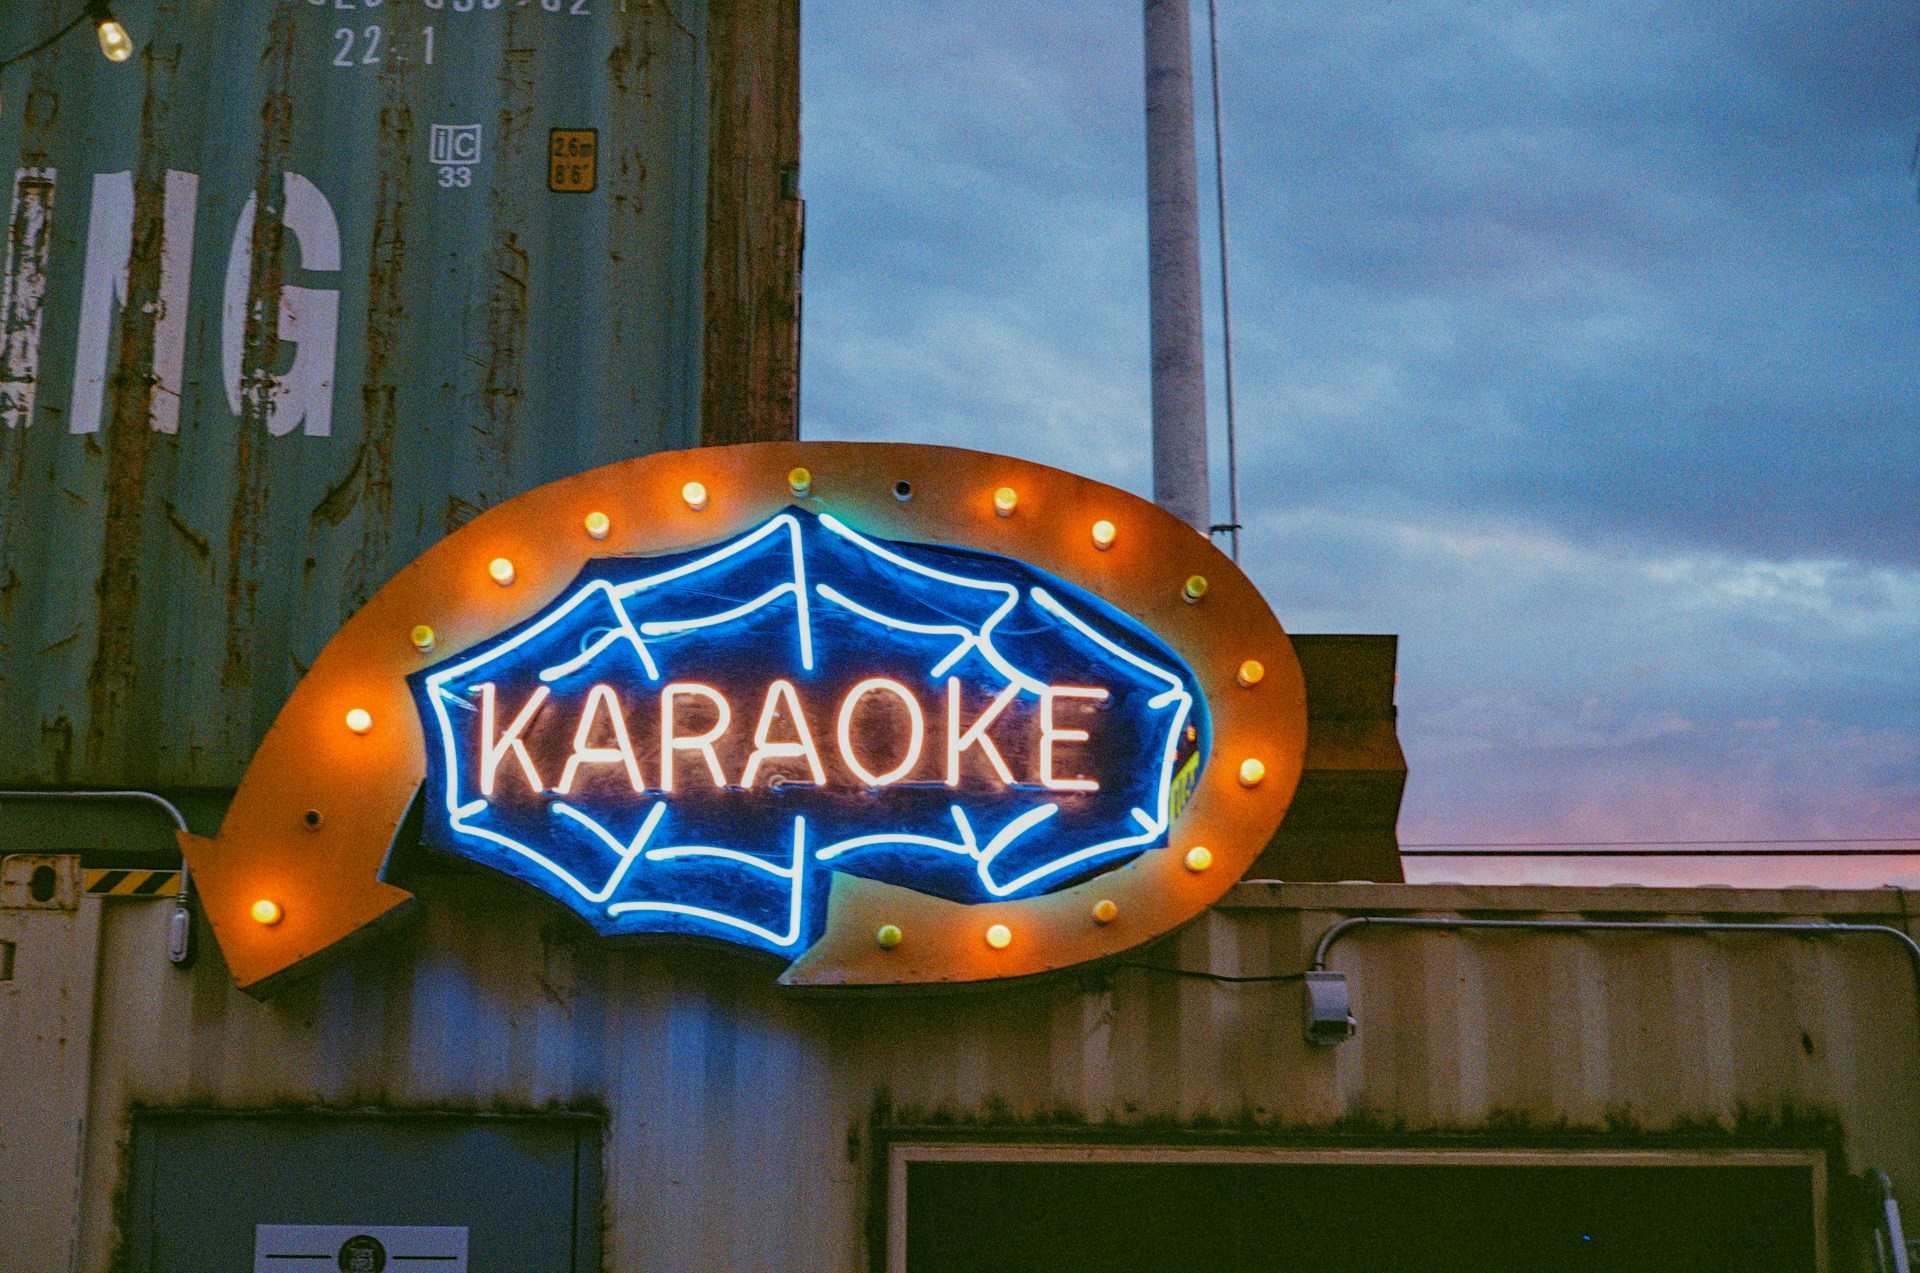 This is how I would throw a karaoke night